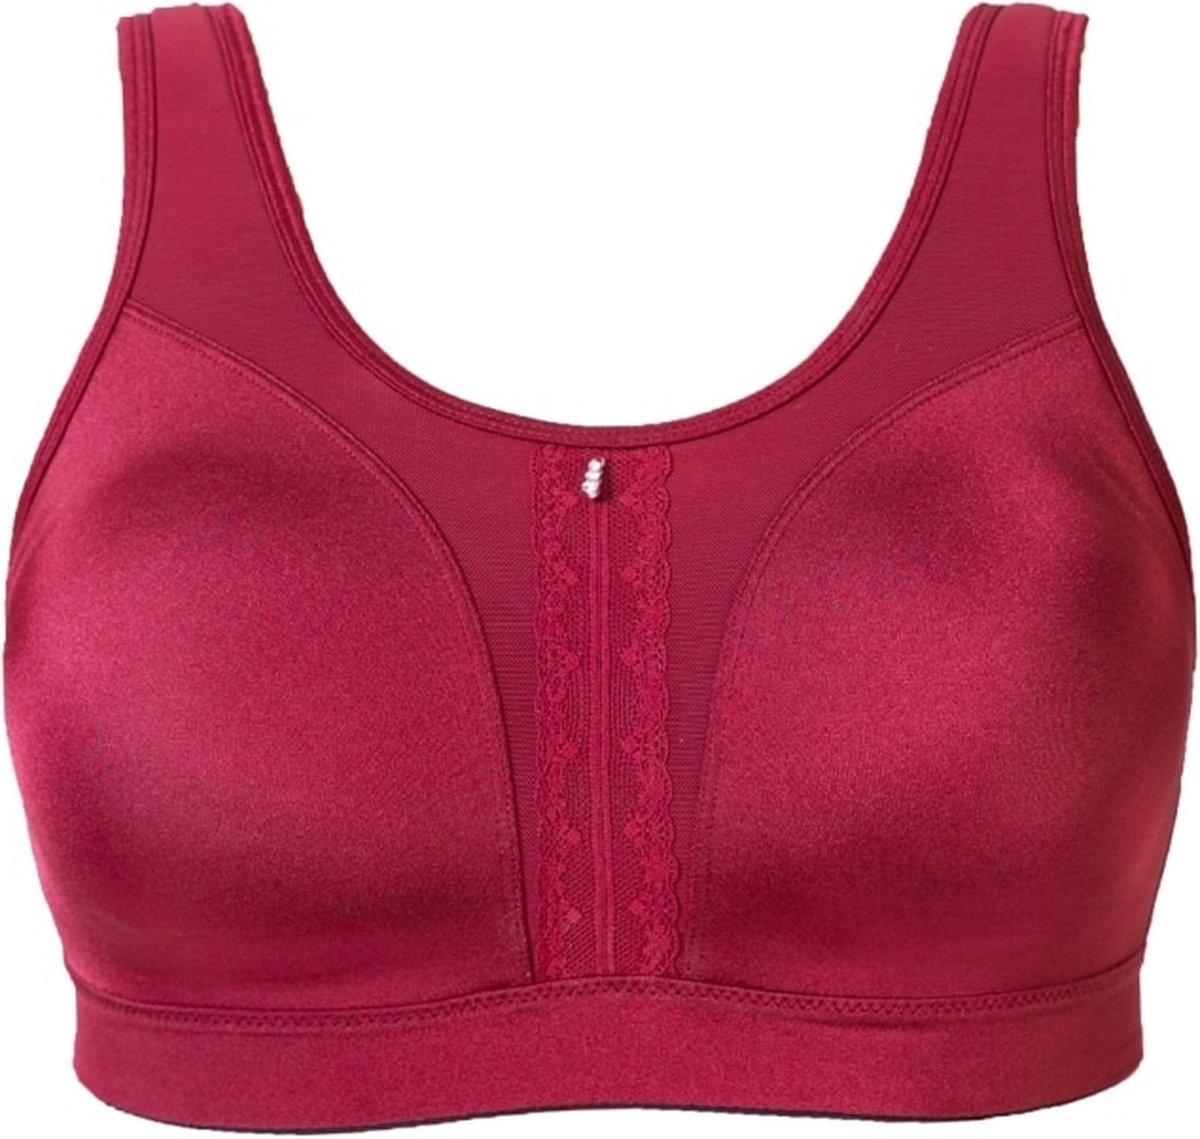 High impact Sport BH (zonder beugel) Cannes, Deep Red / Bordeaux rood, maat: 80F